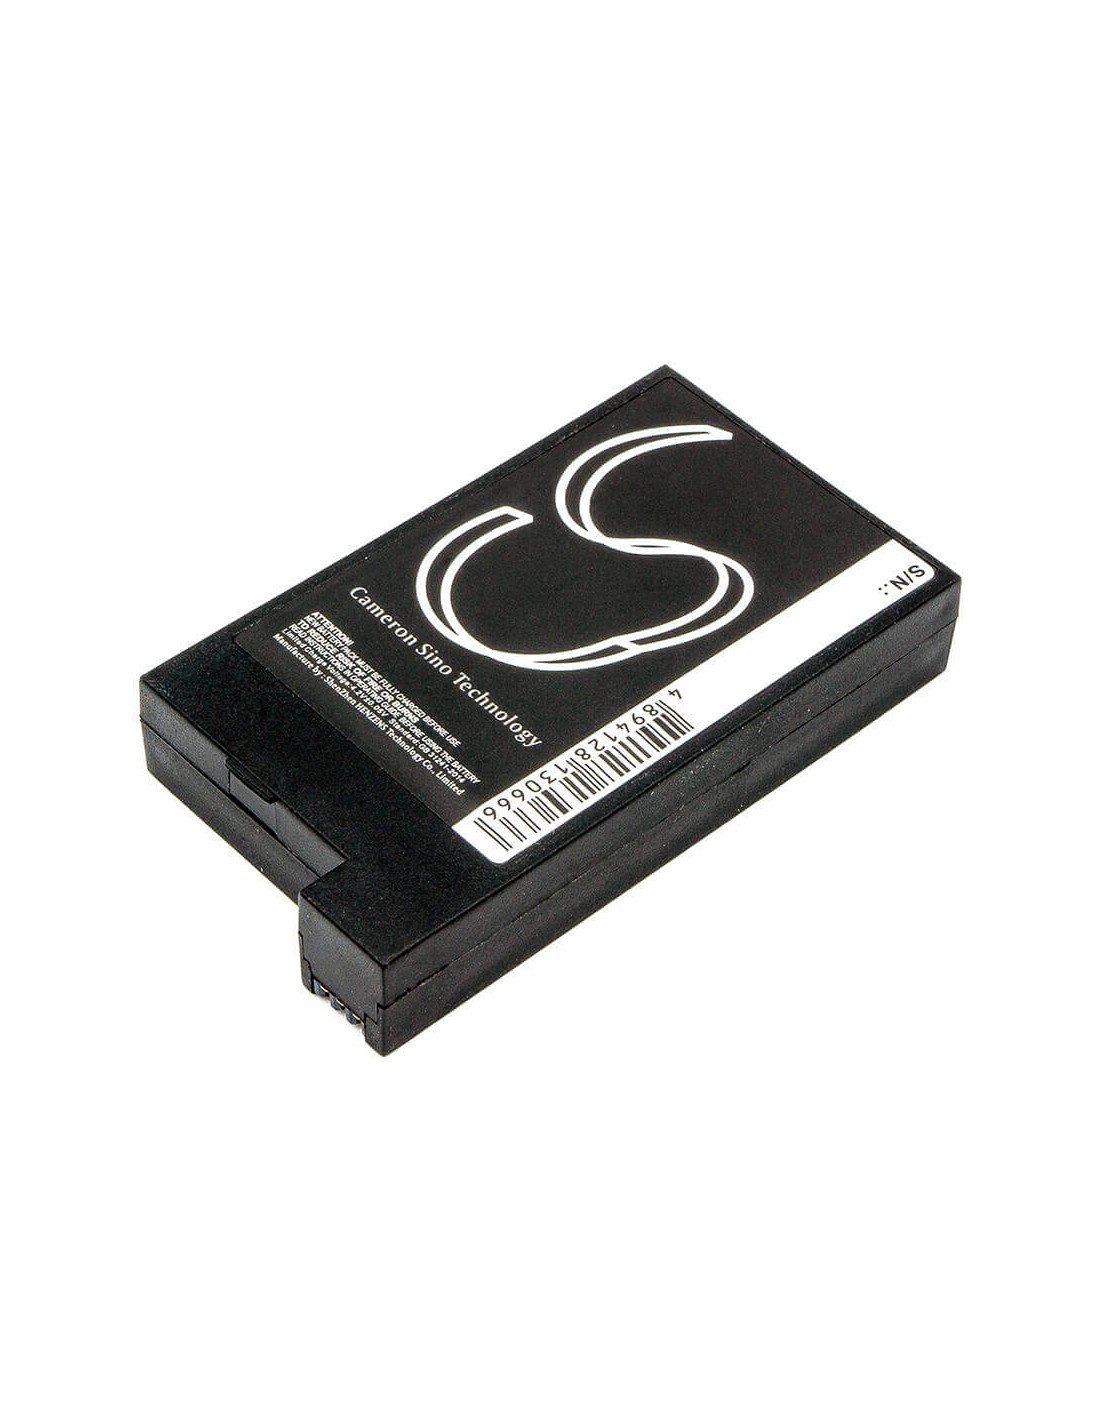 Battery for Cipherlab, Cp30, Cp30-l, Cp50 3.7V, 2200mAh - 8.14Wh